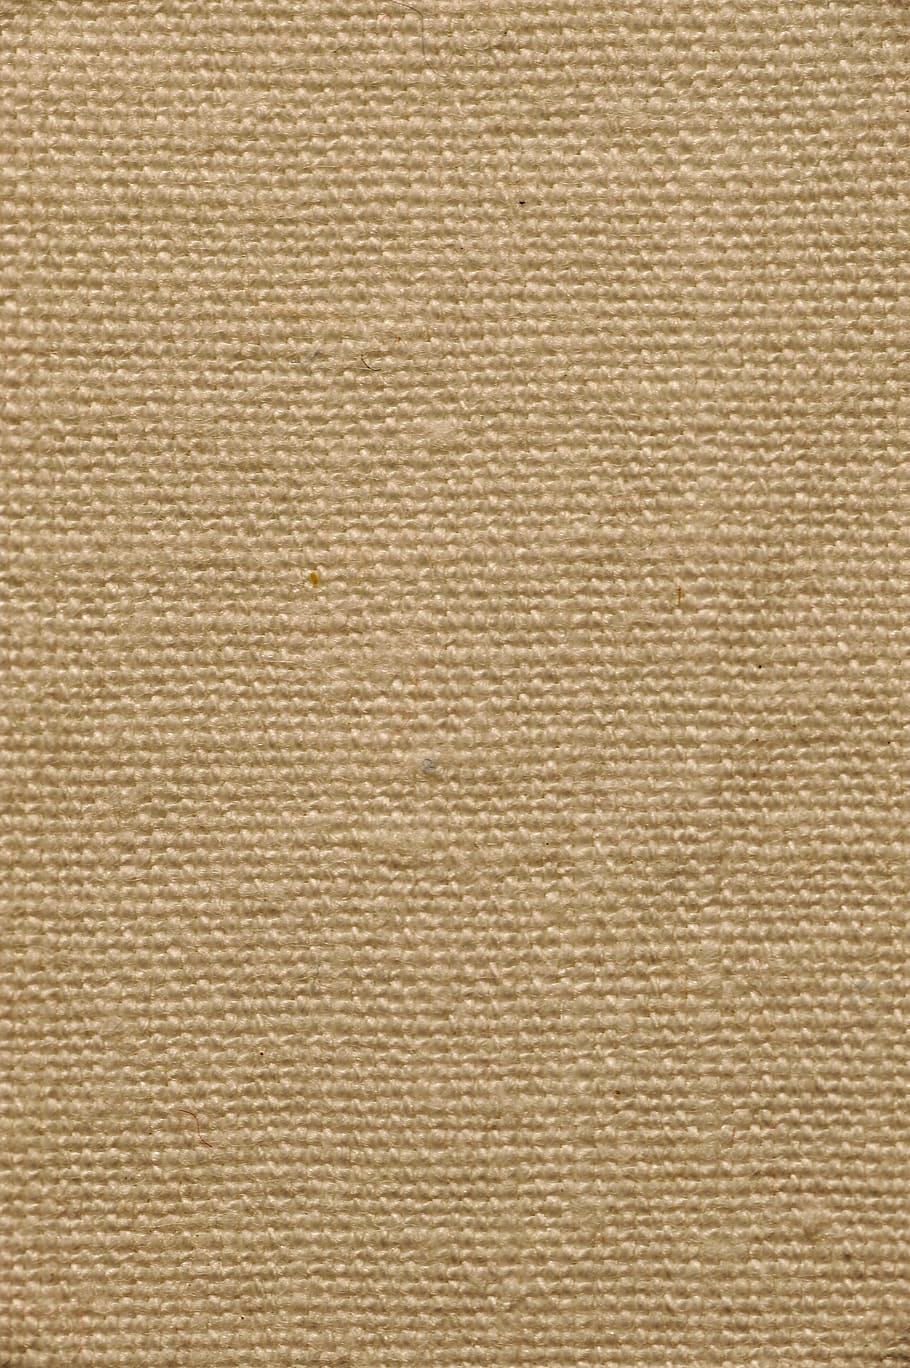 Fabric Texture Embroidery Color Canvas Lana Cotton Textured Backgrounds Material Pxfuel